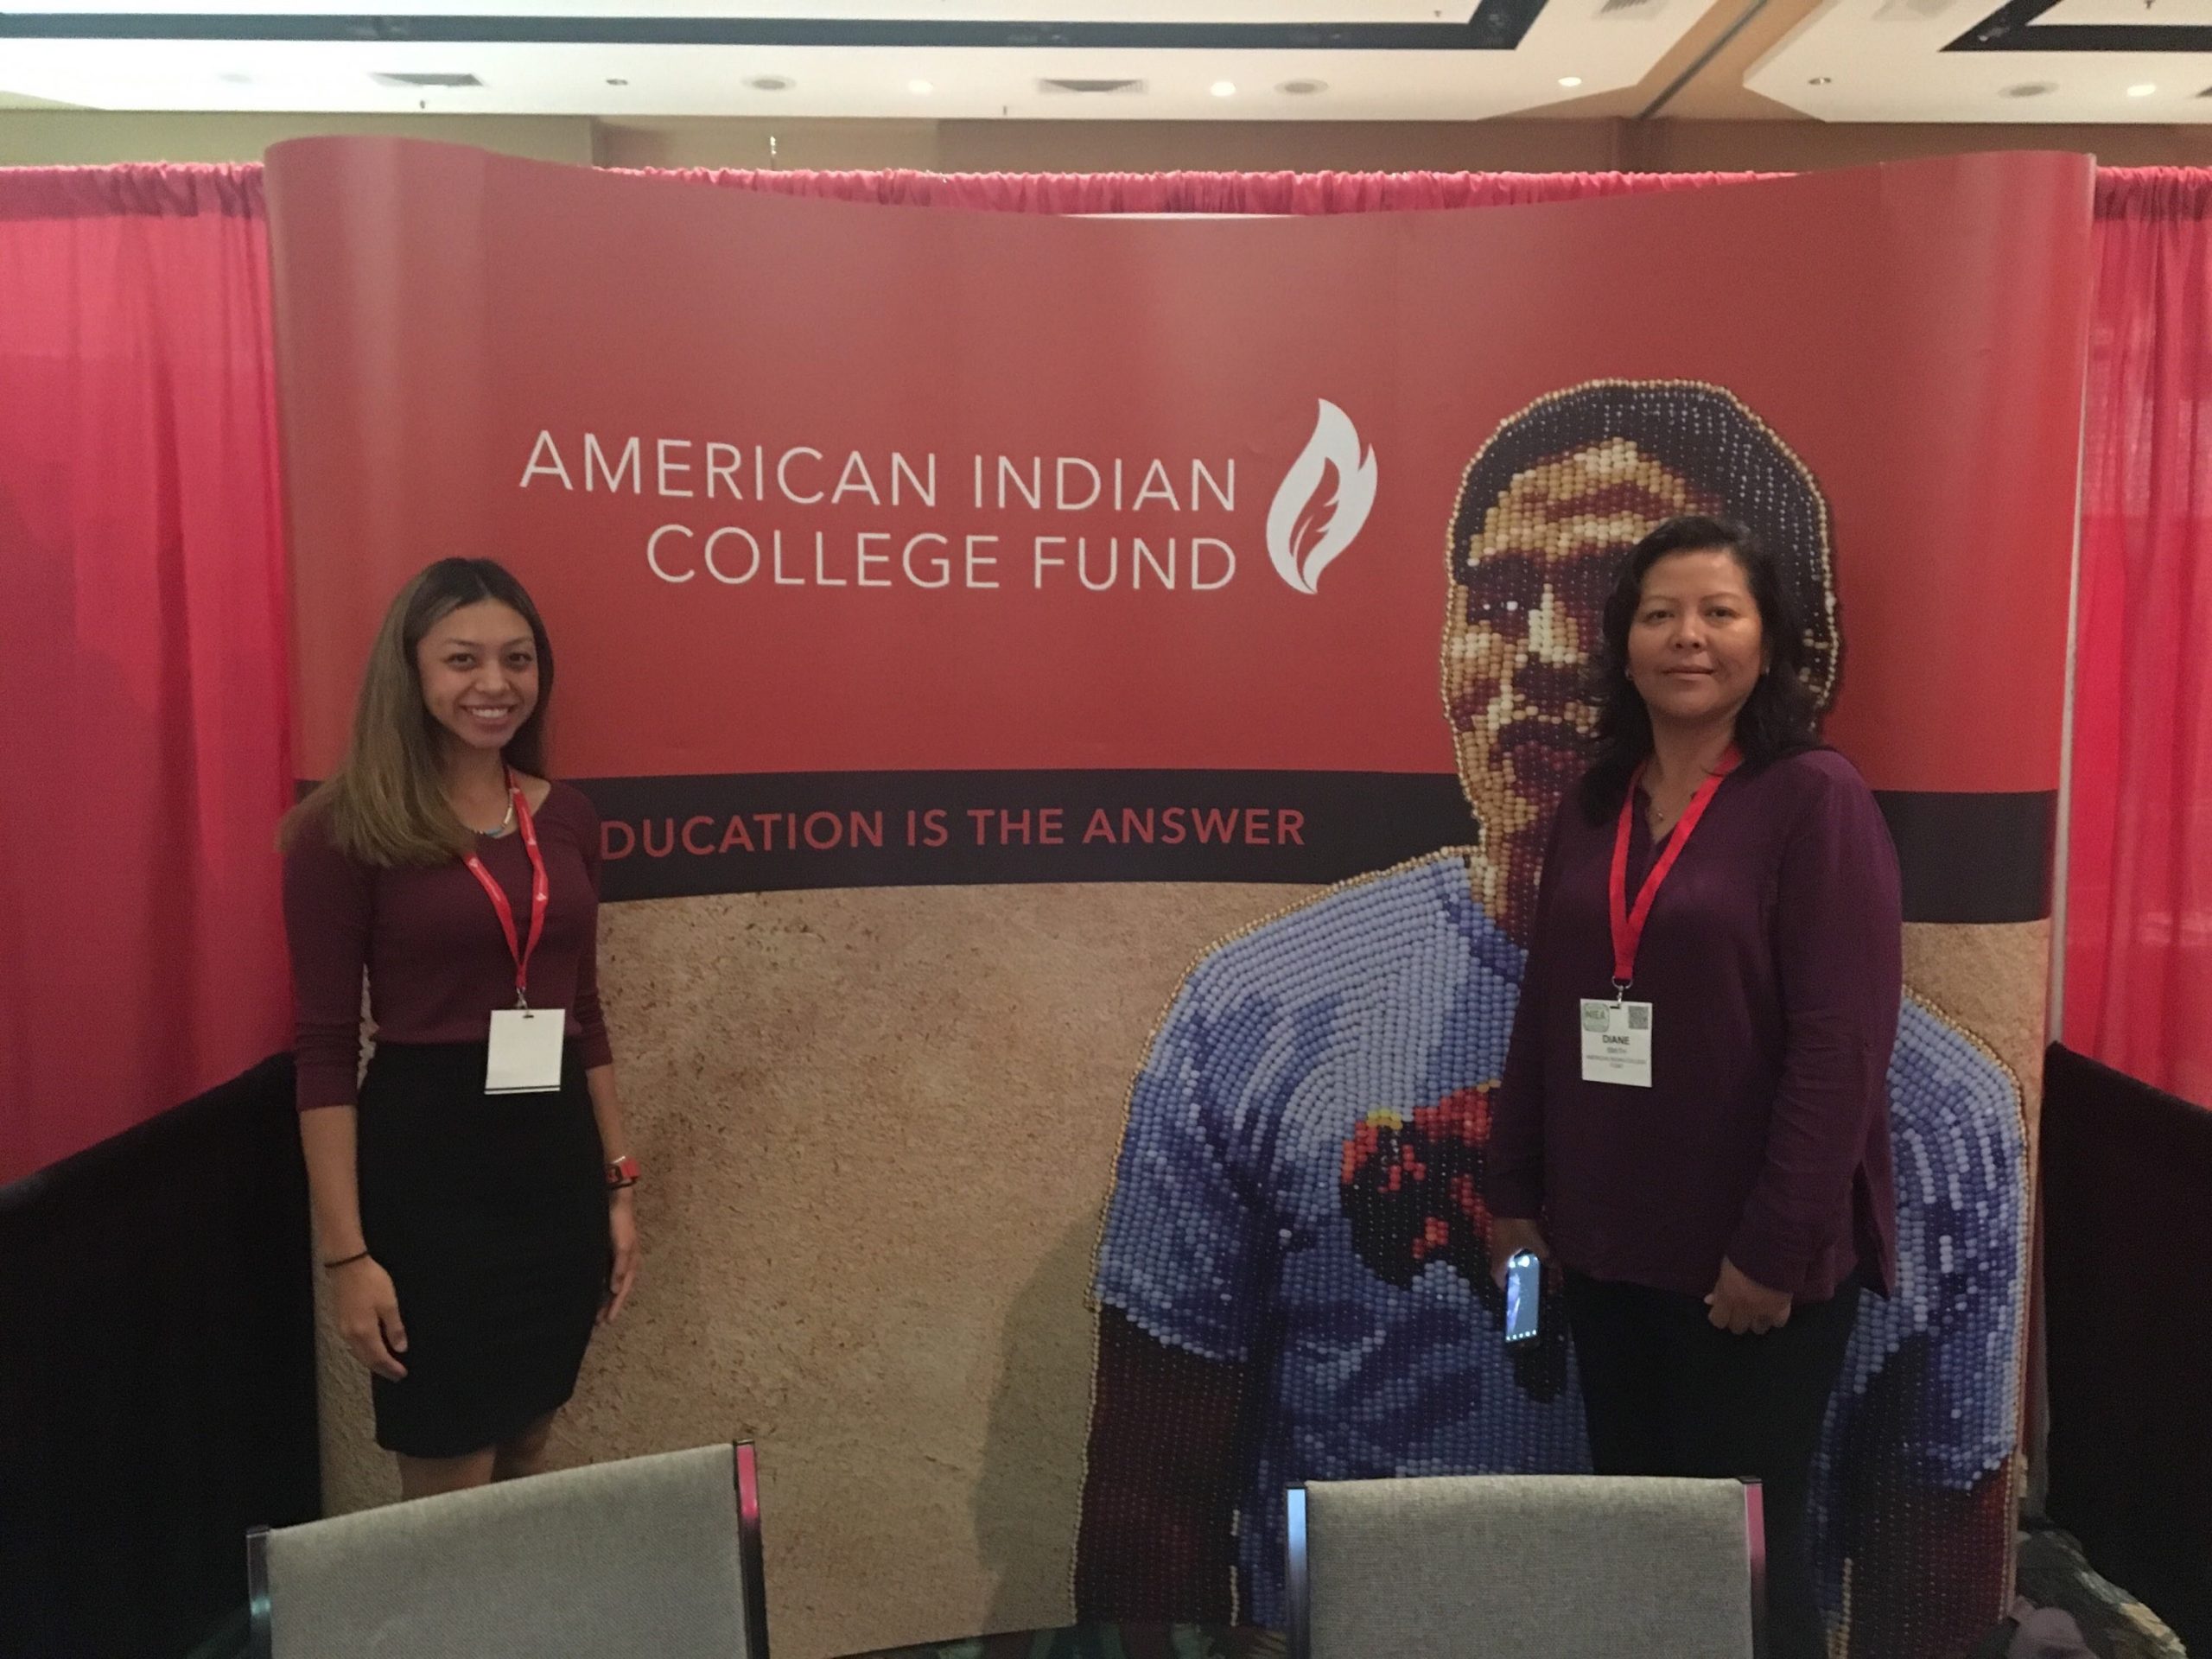 Kami (left) and Diane pose for a photo at the National Indian Education Association